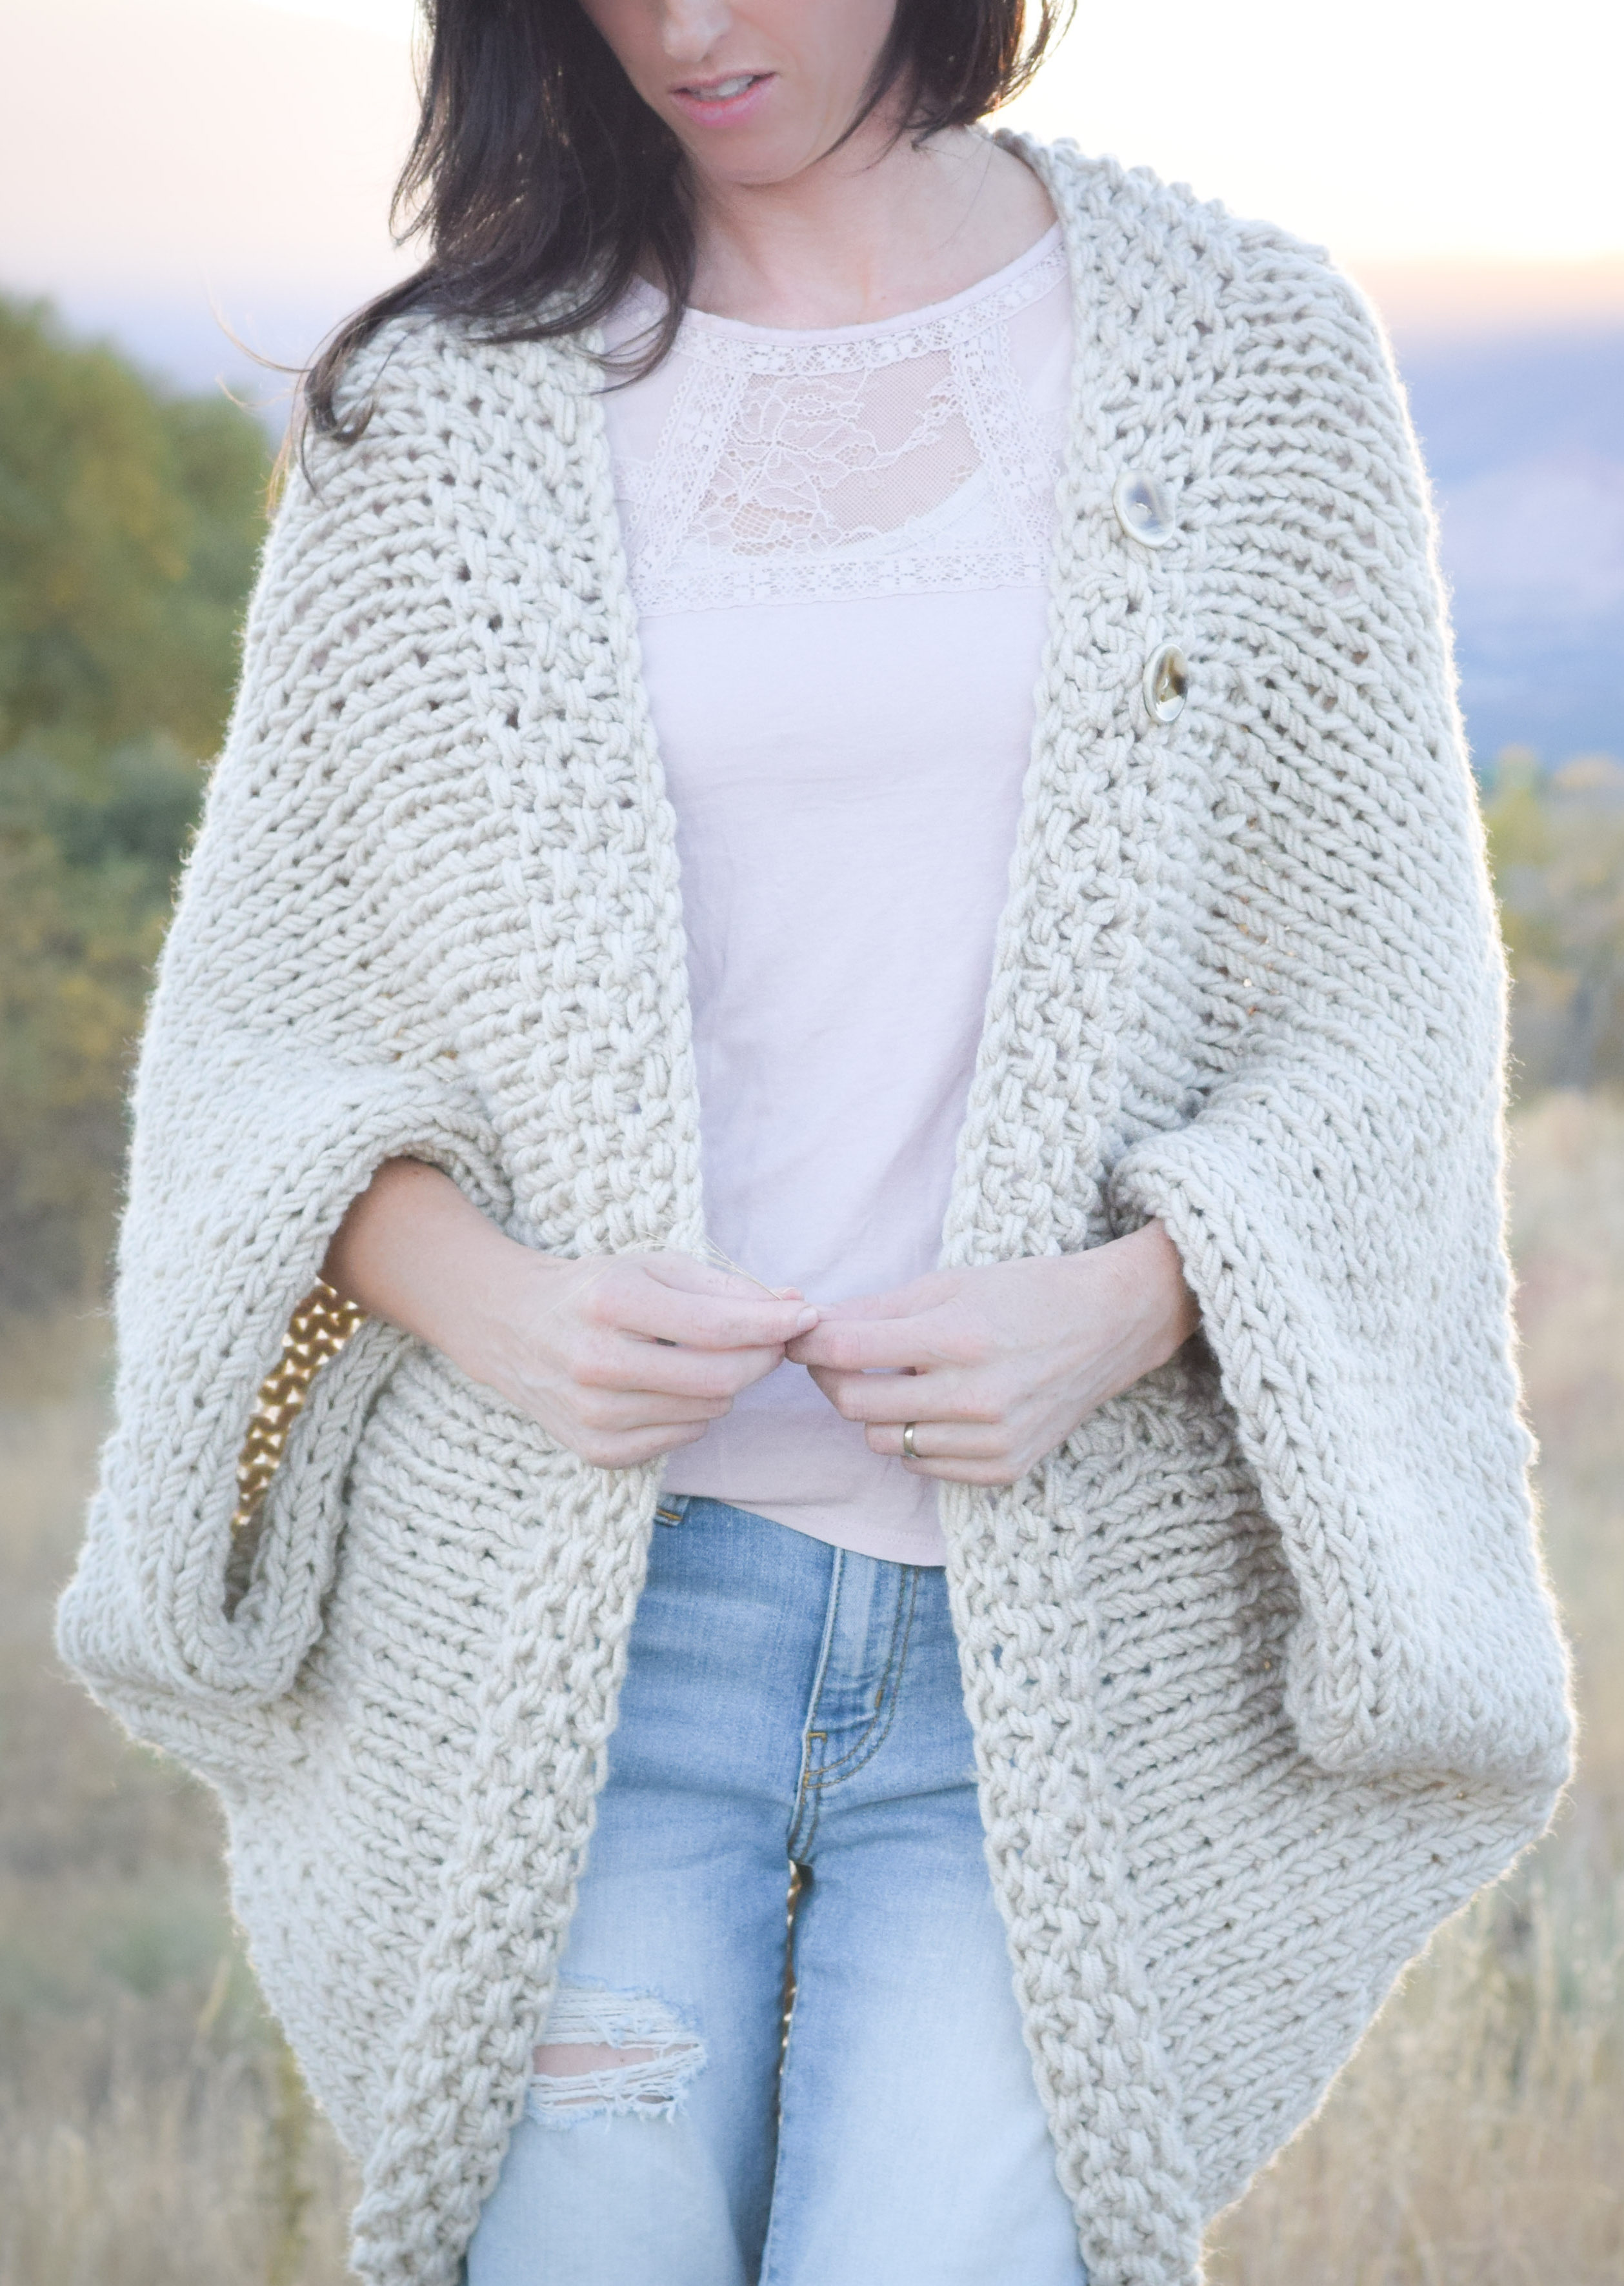 Easy Sweater Knitting Patterns | In the Loop Knitting